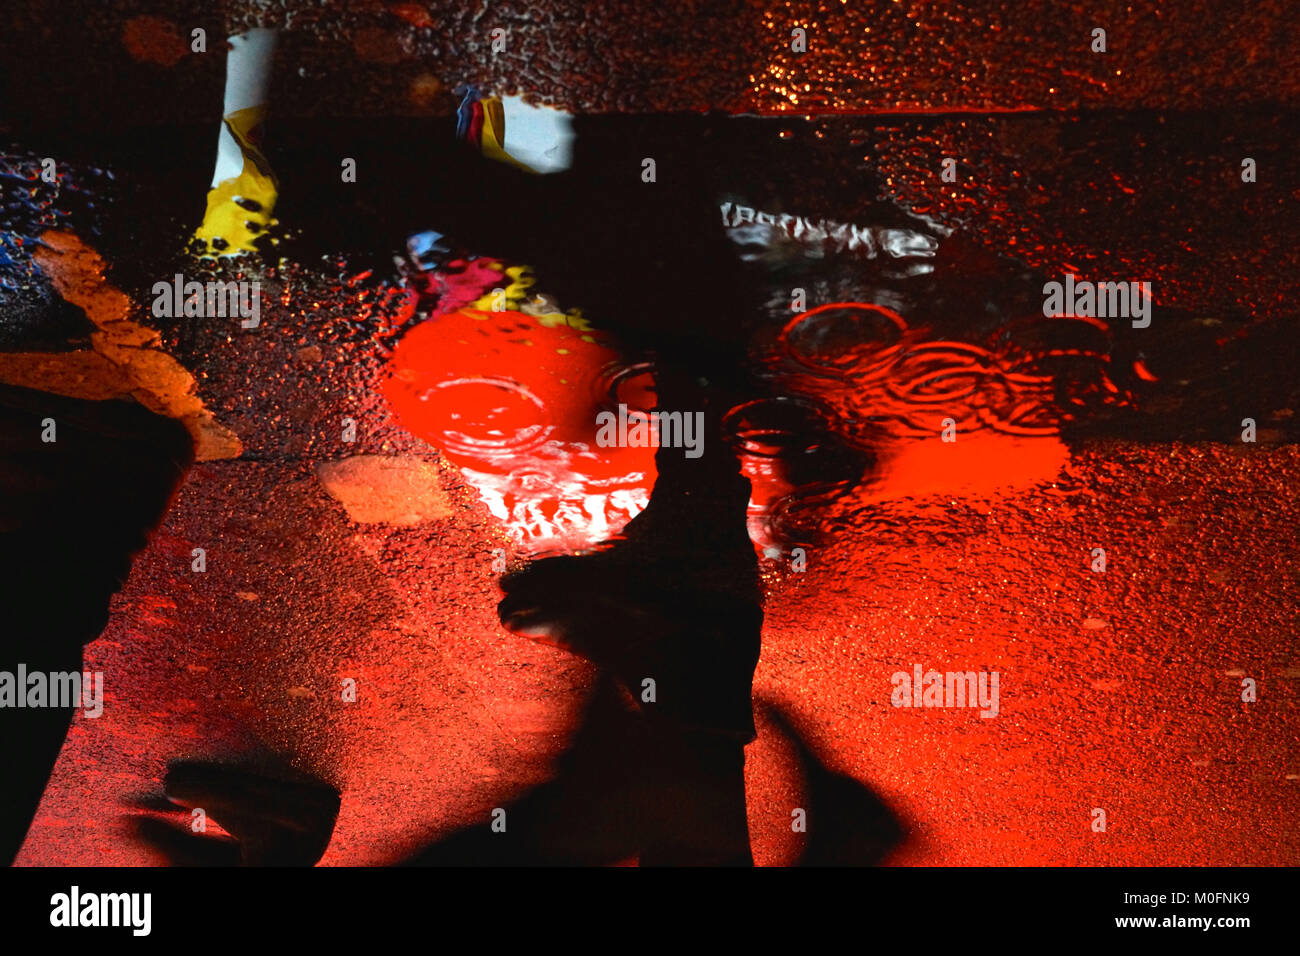 Coca cola advertisement reflected in a puddle at Piccadilly Circus, London Stock Photo